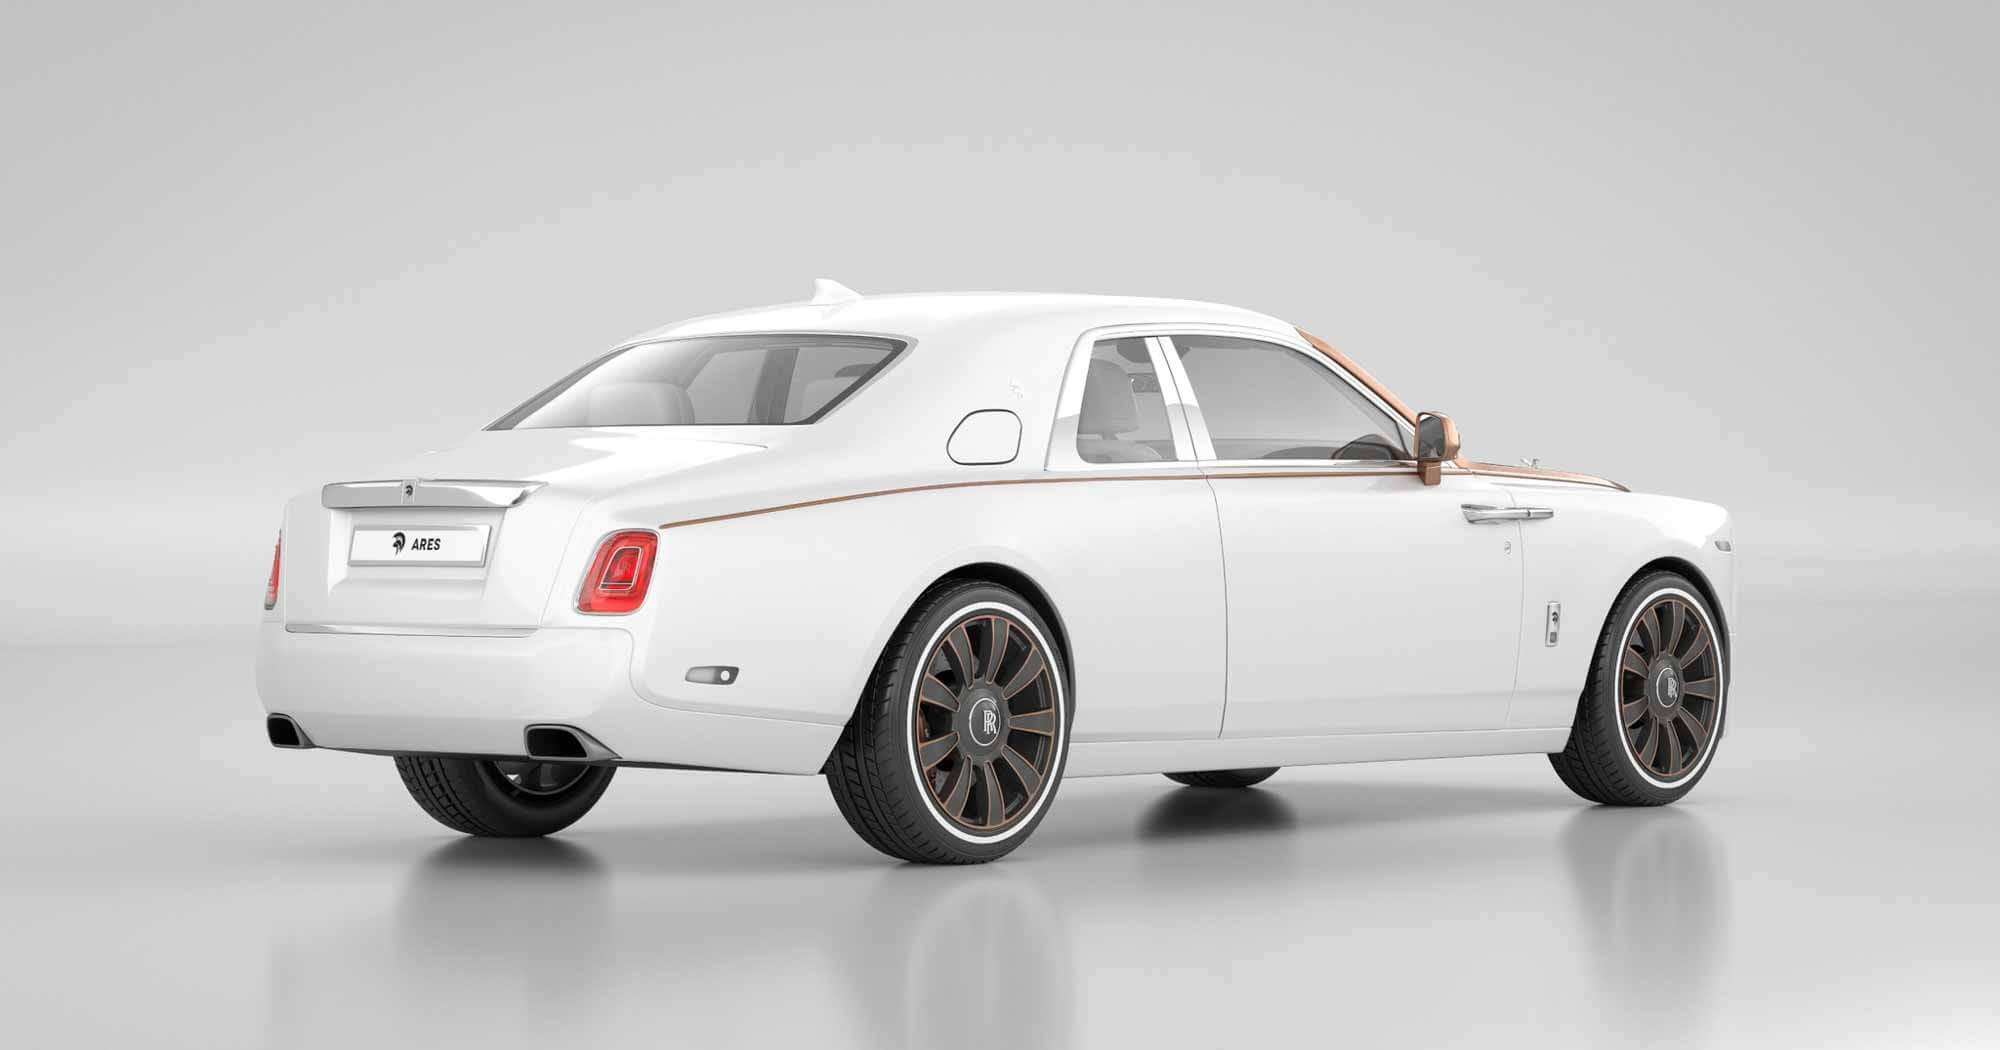 ARES Modena made a coupe from the latest generation Rolls-Royce Phantom sedan